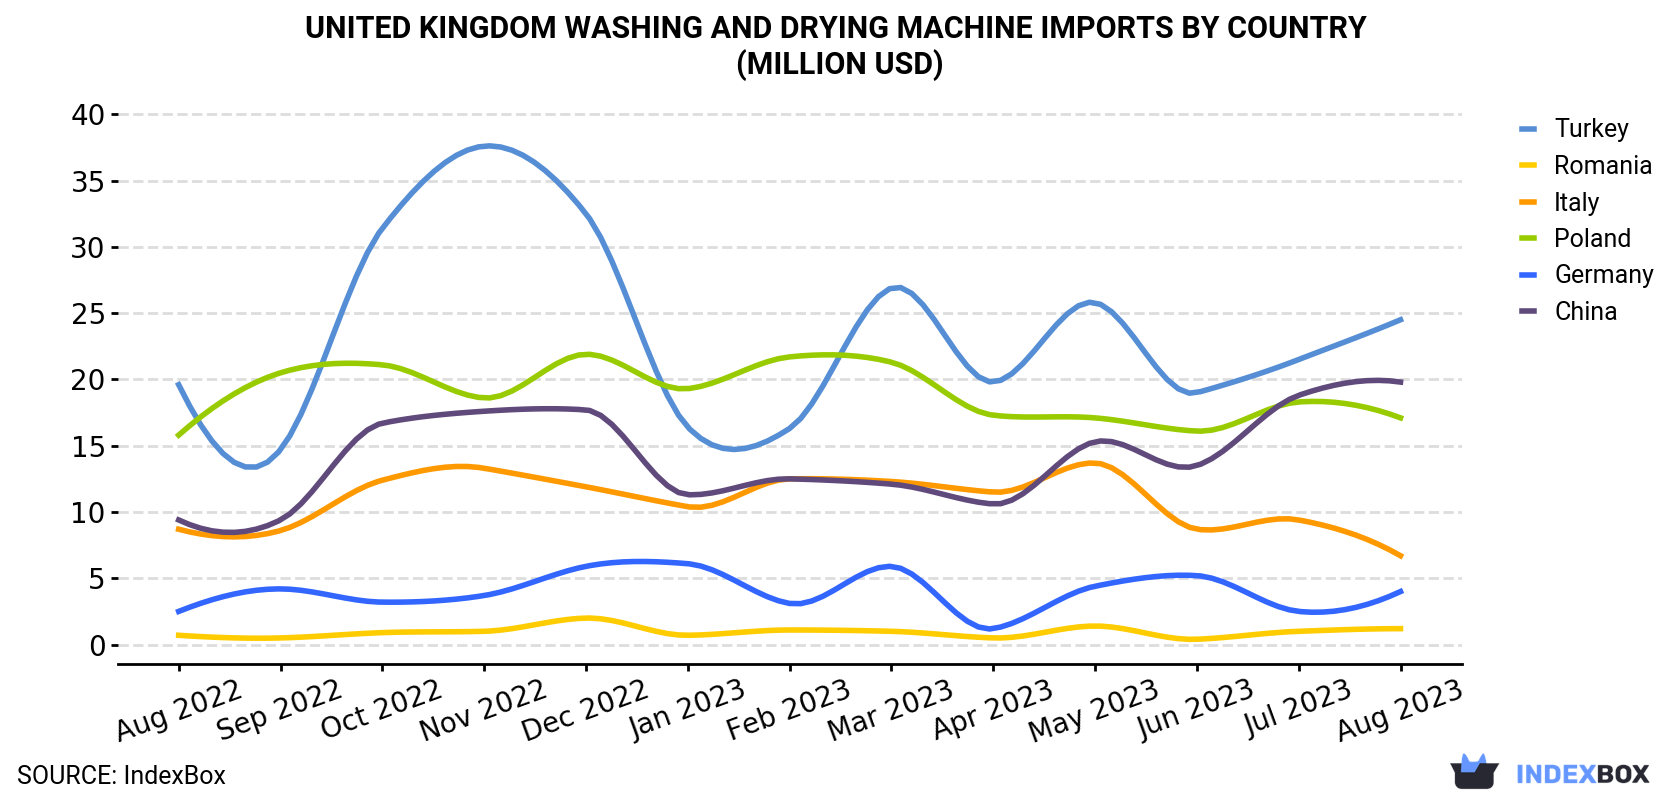 United Kingdom Washing and Drying Machine Imports By Country (Million USD)